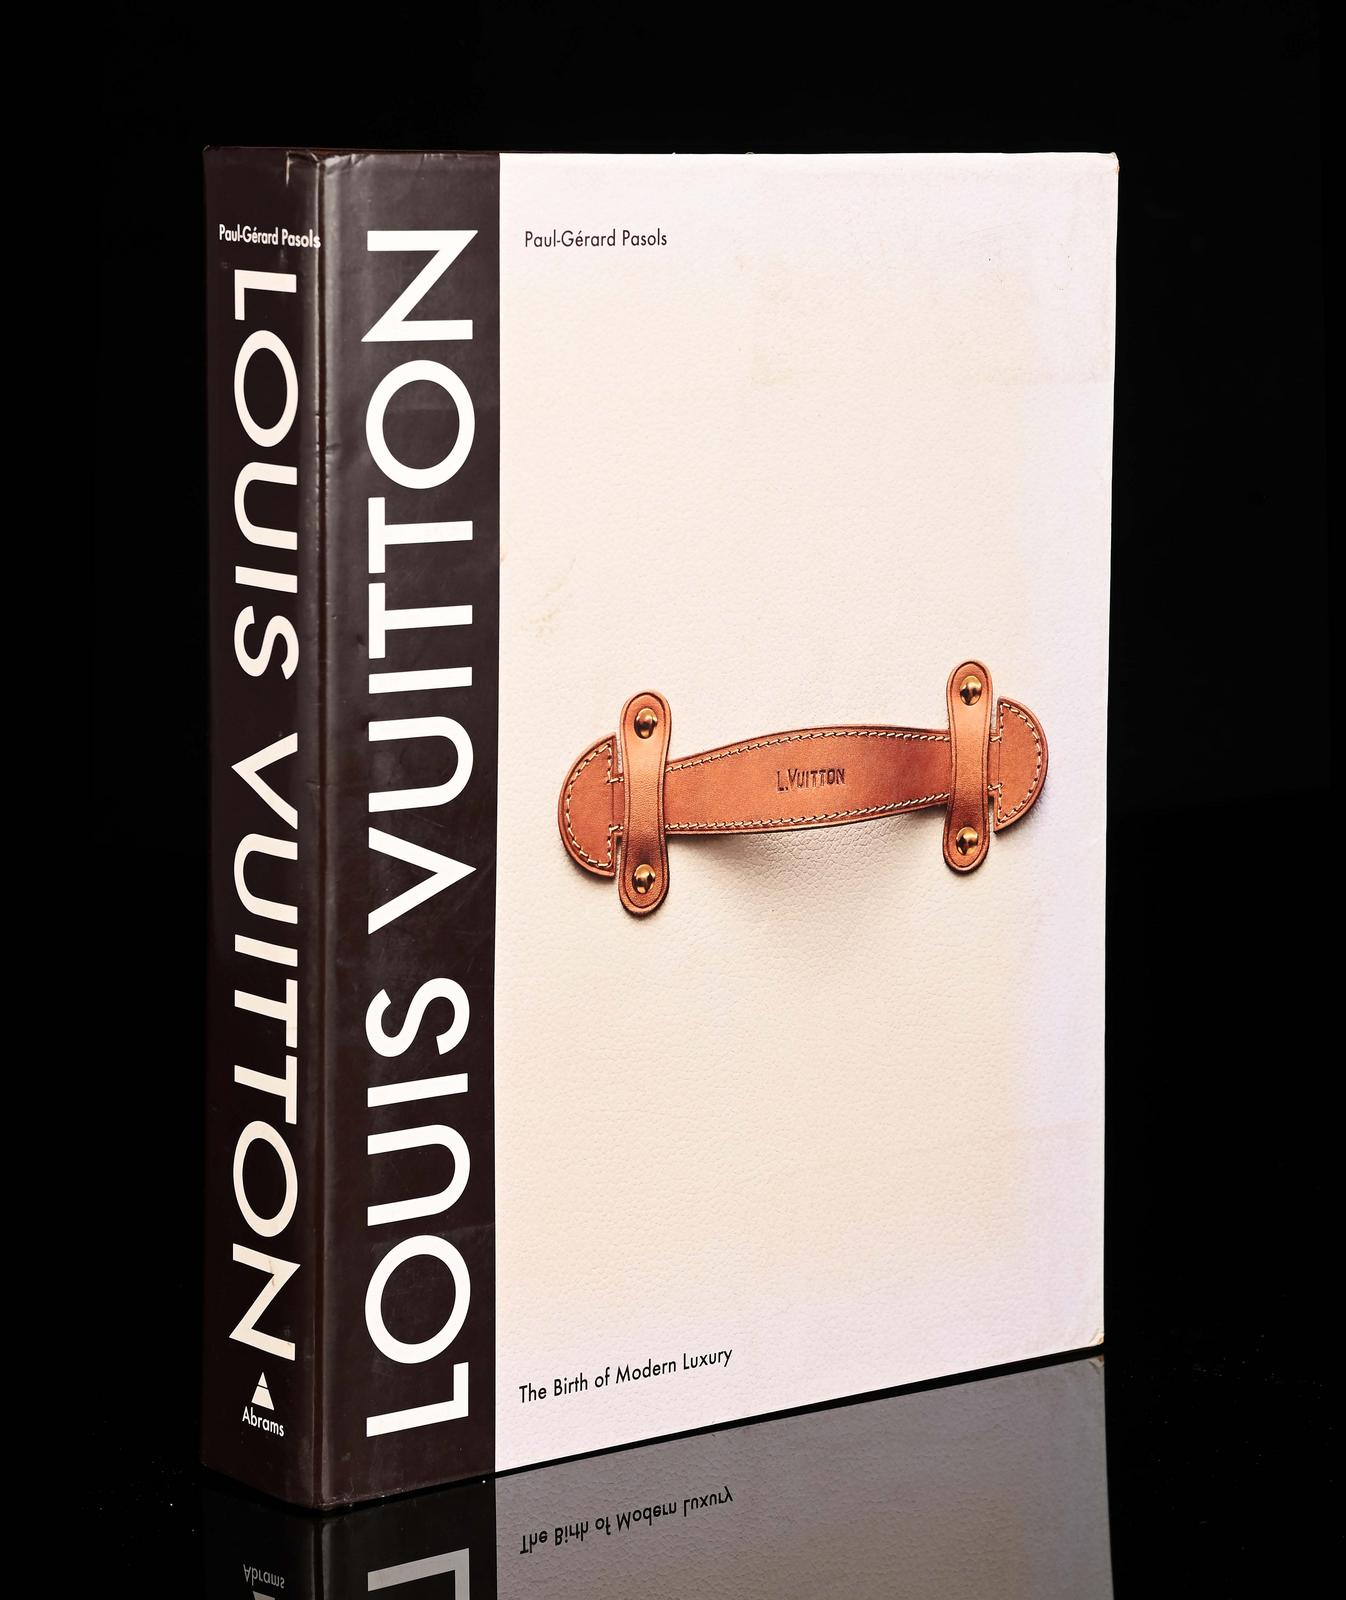 LOUIS VUITTON The Birth of Modern Luxury by Paul-Gerard Pasols